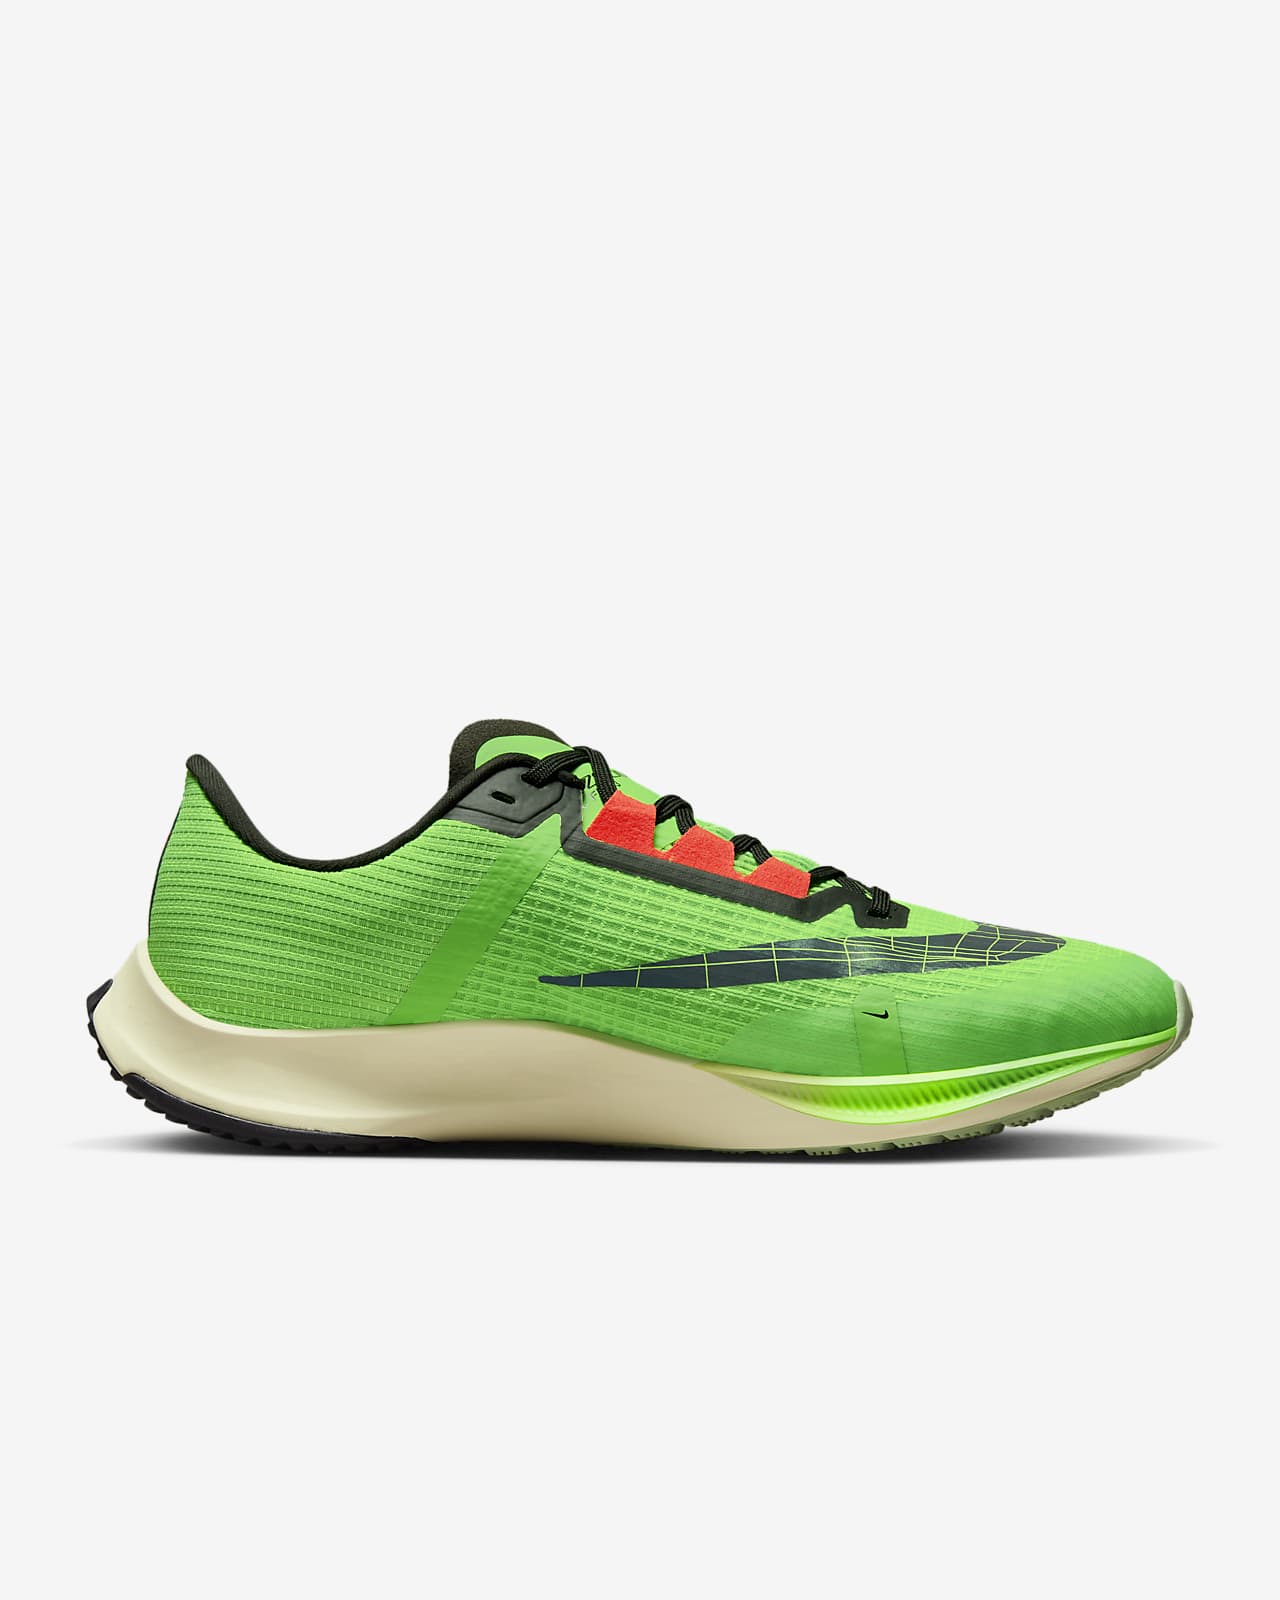 Nike Zoom Rival Fly 3 Road Racing Shoes.